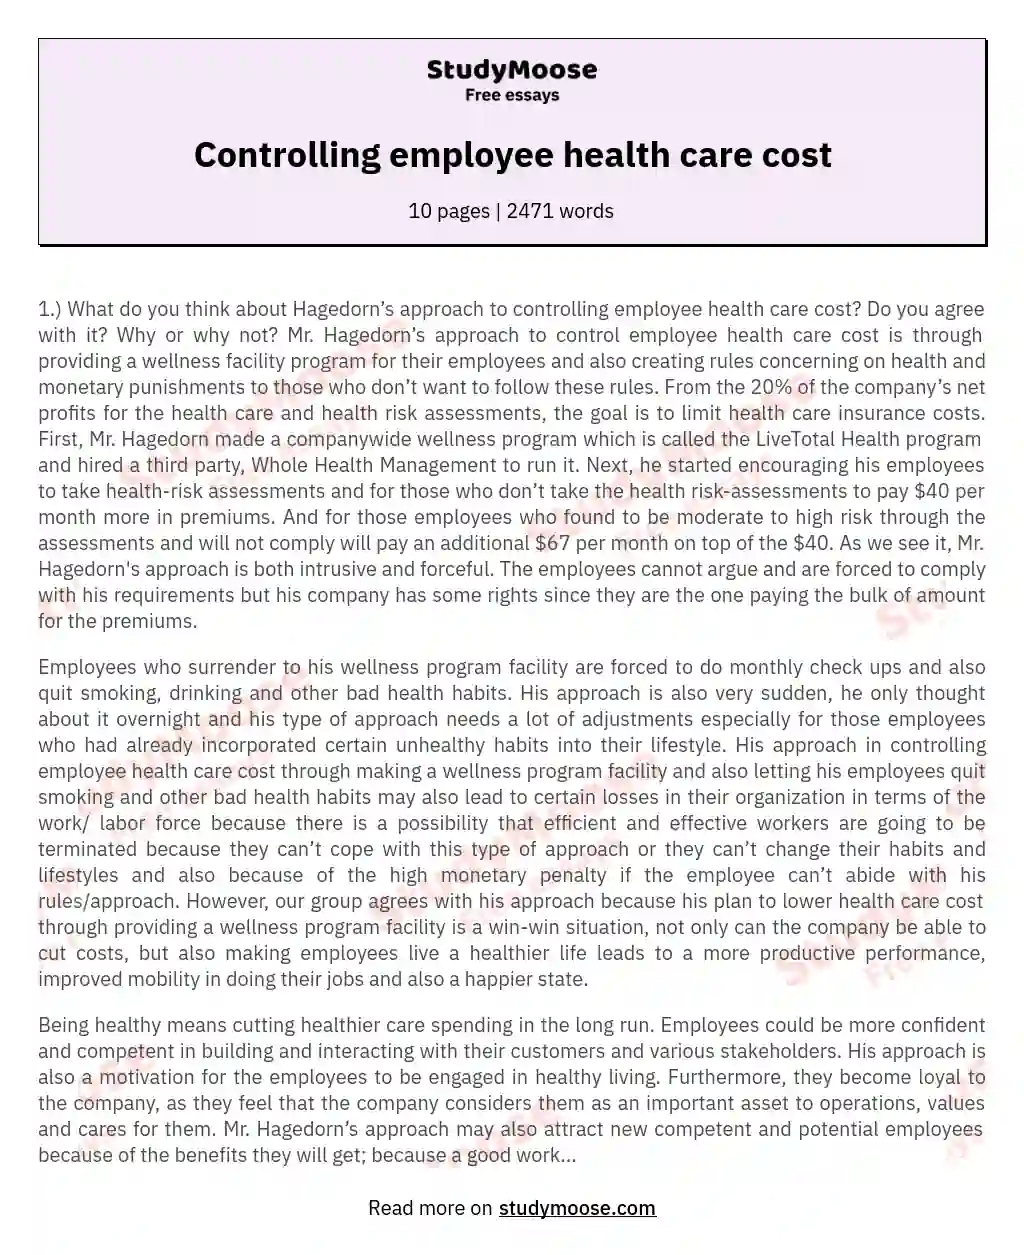 Controlling employee health care cost essay